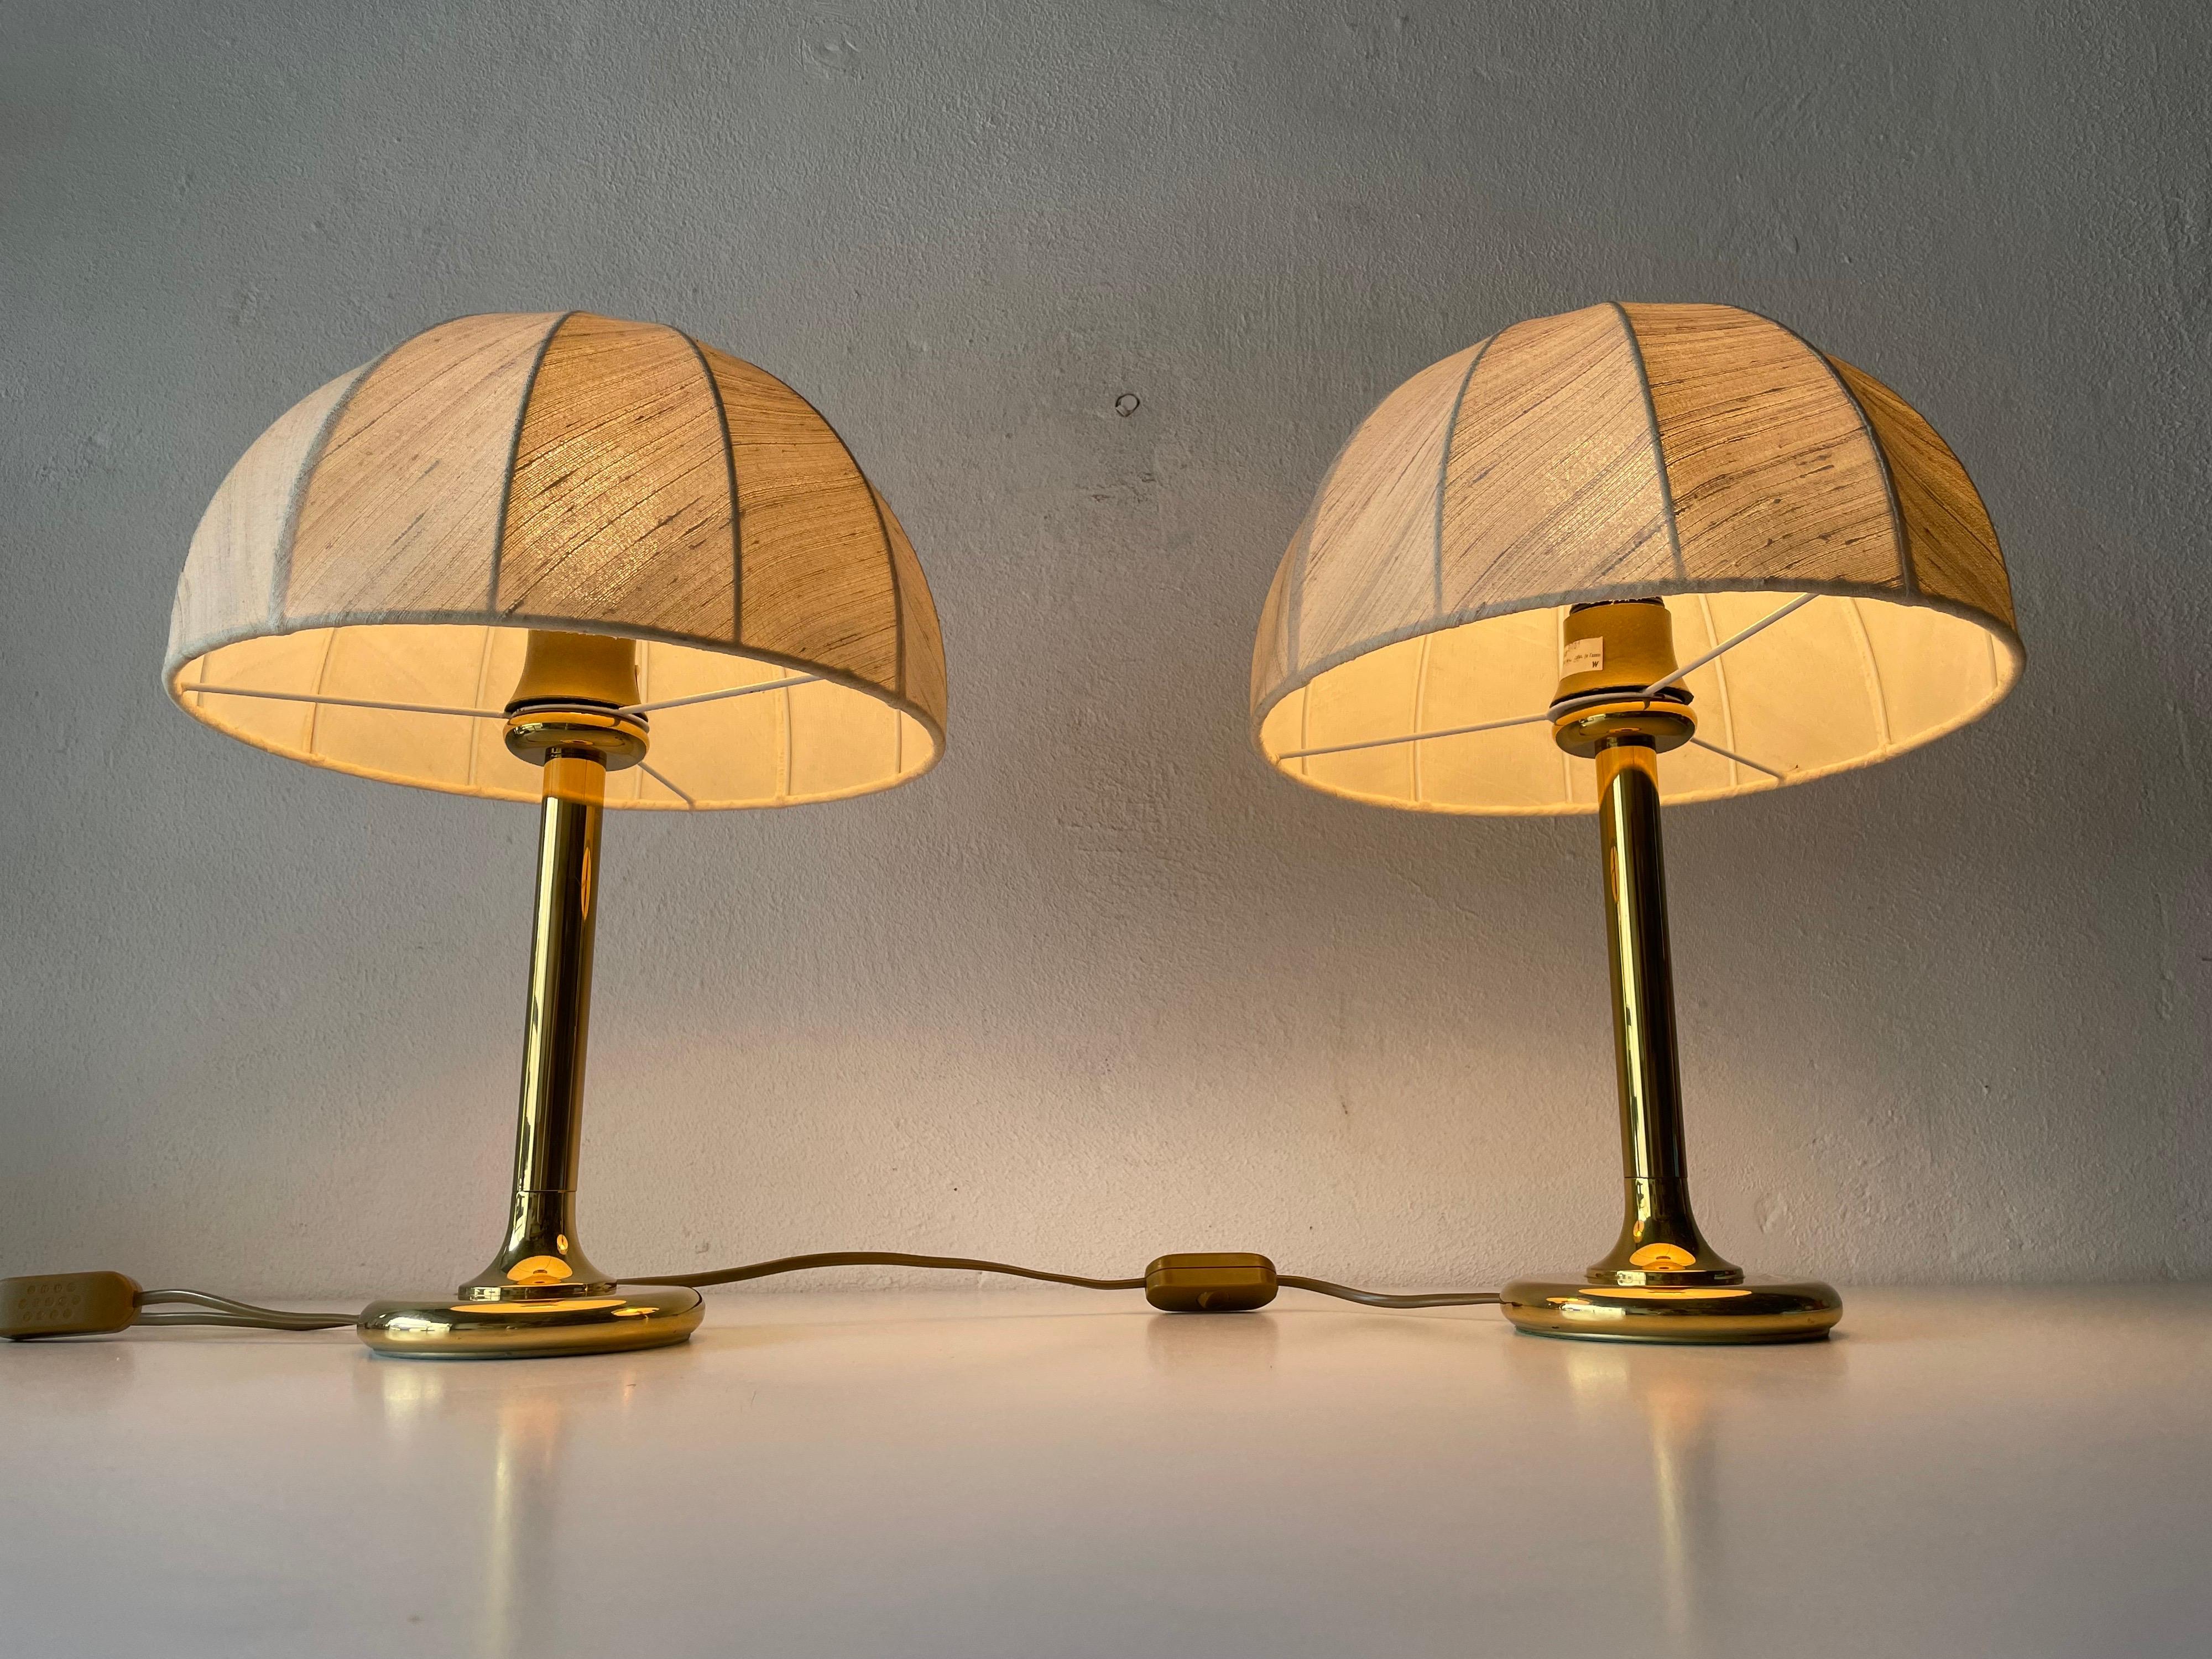 Fabric Shade & Brass Body Elegant Pair of Bedside Lamps by ERU, 1980s, Germany 2